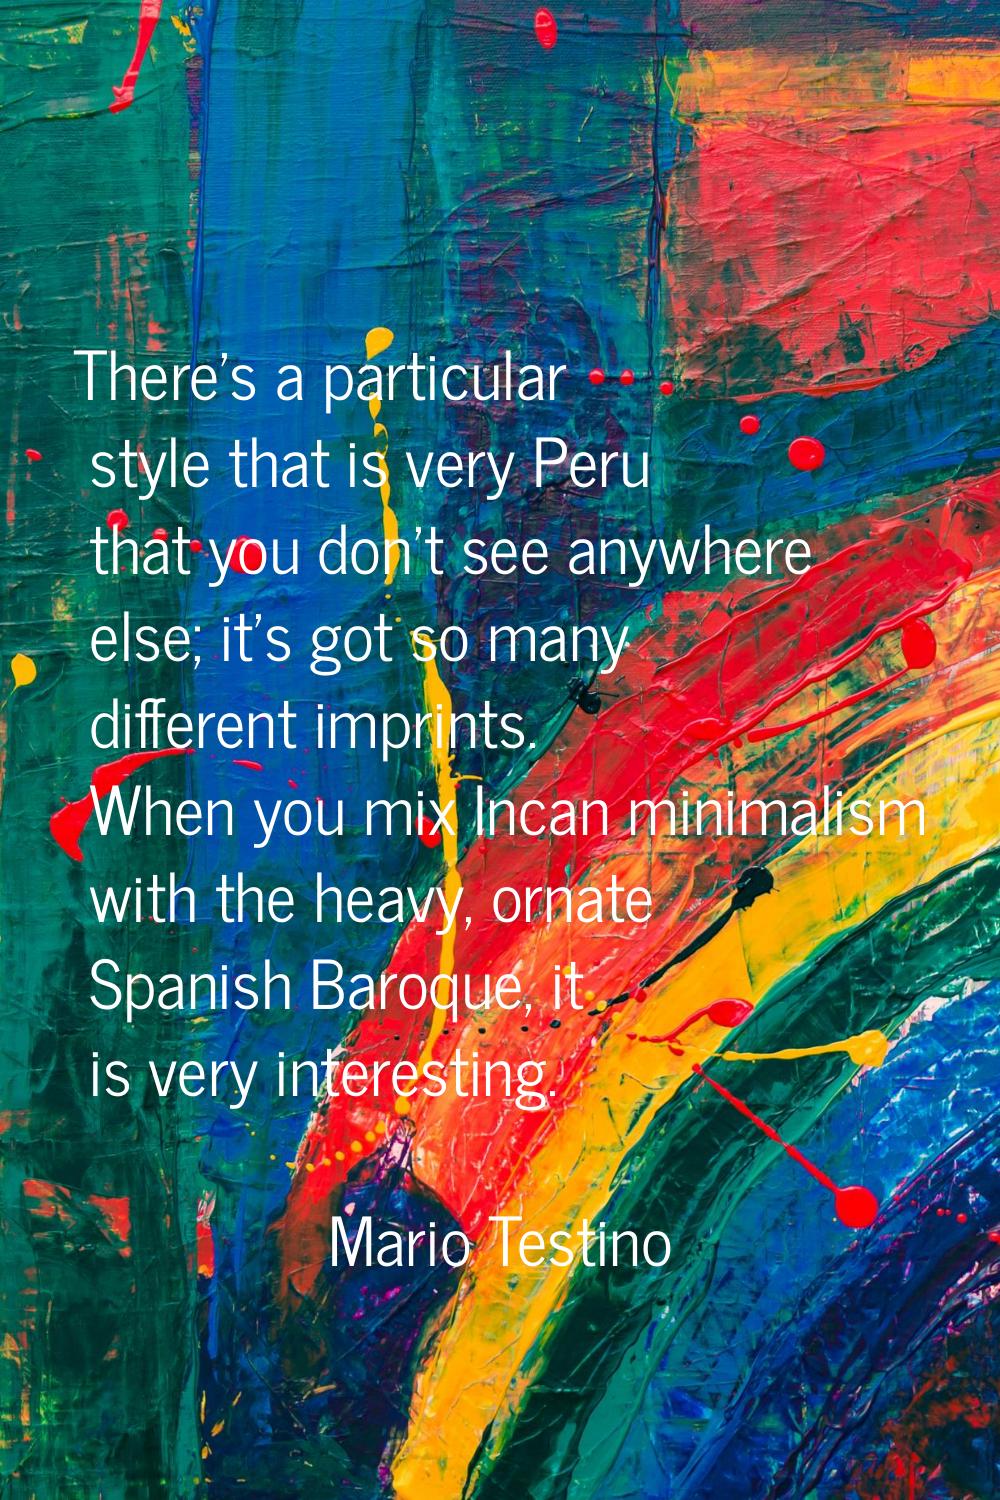 There's a particular style that is very Peru that you don't see anywhere else; it's got so many dif